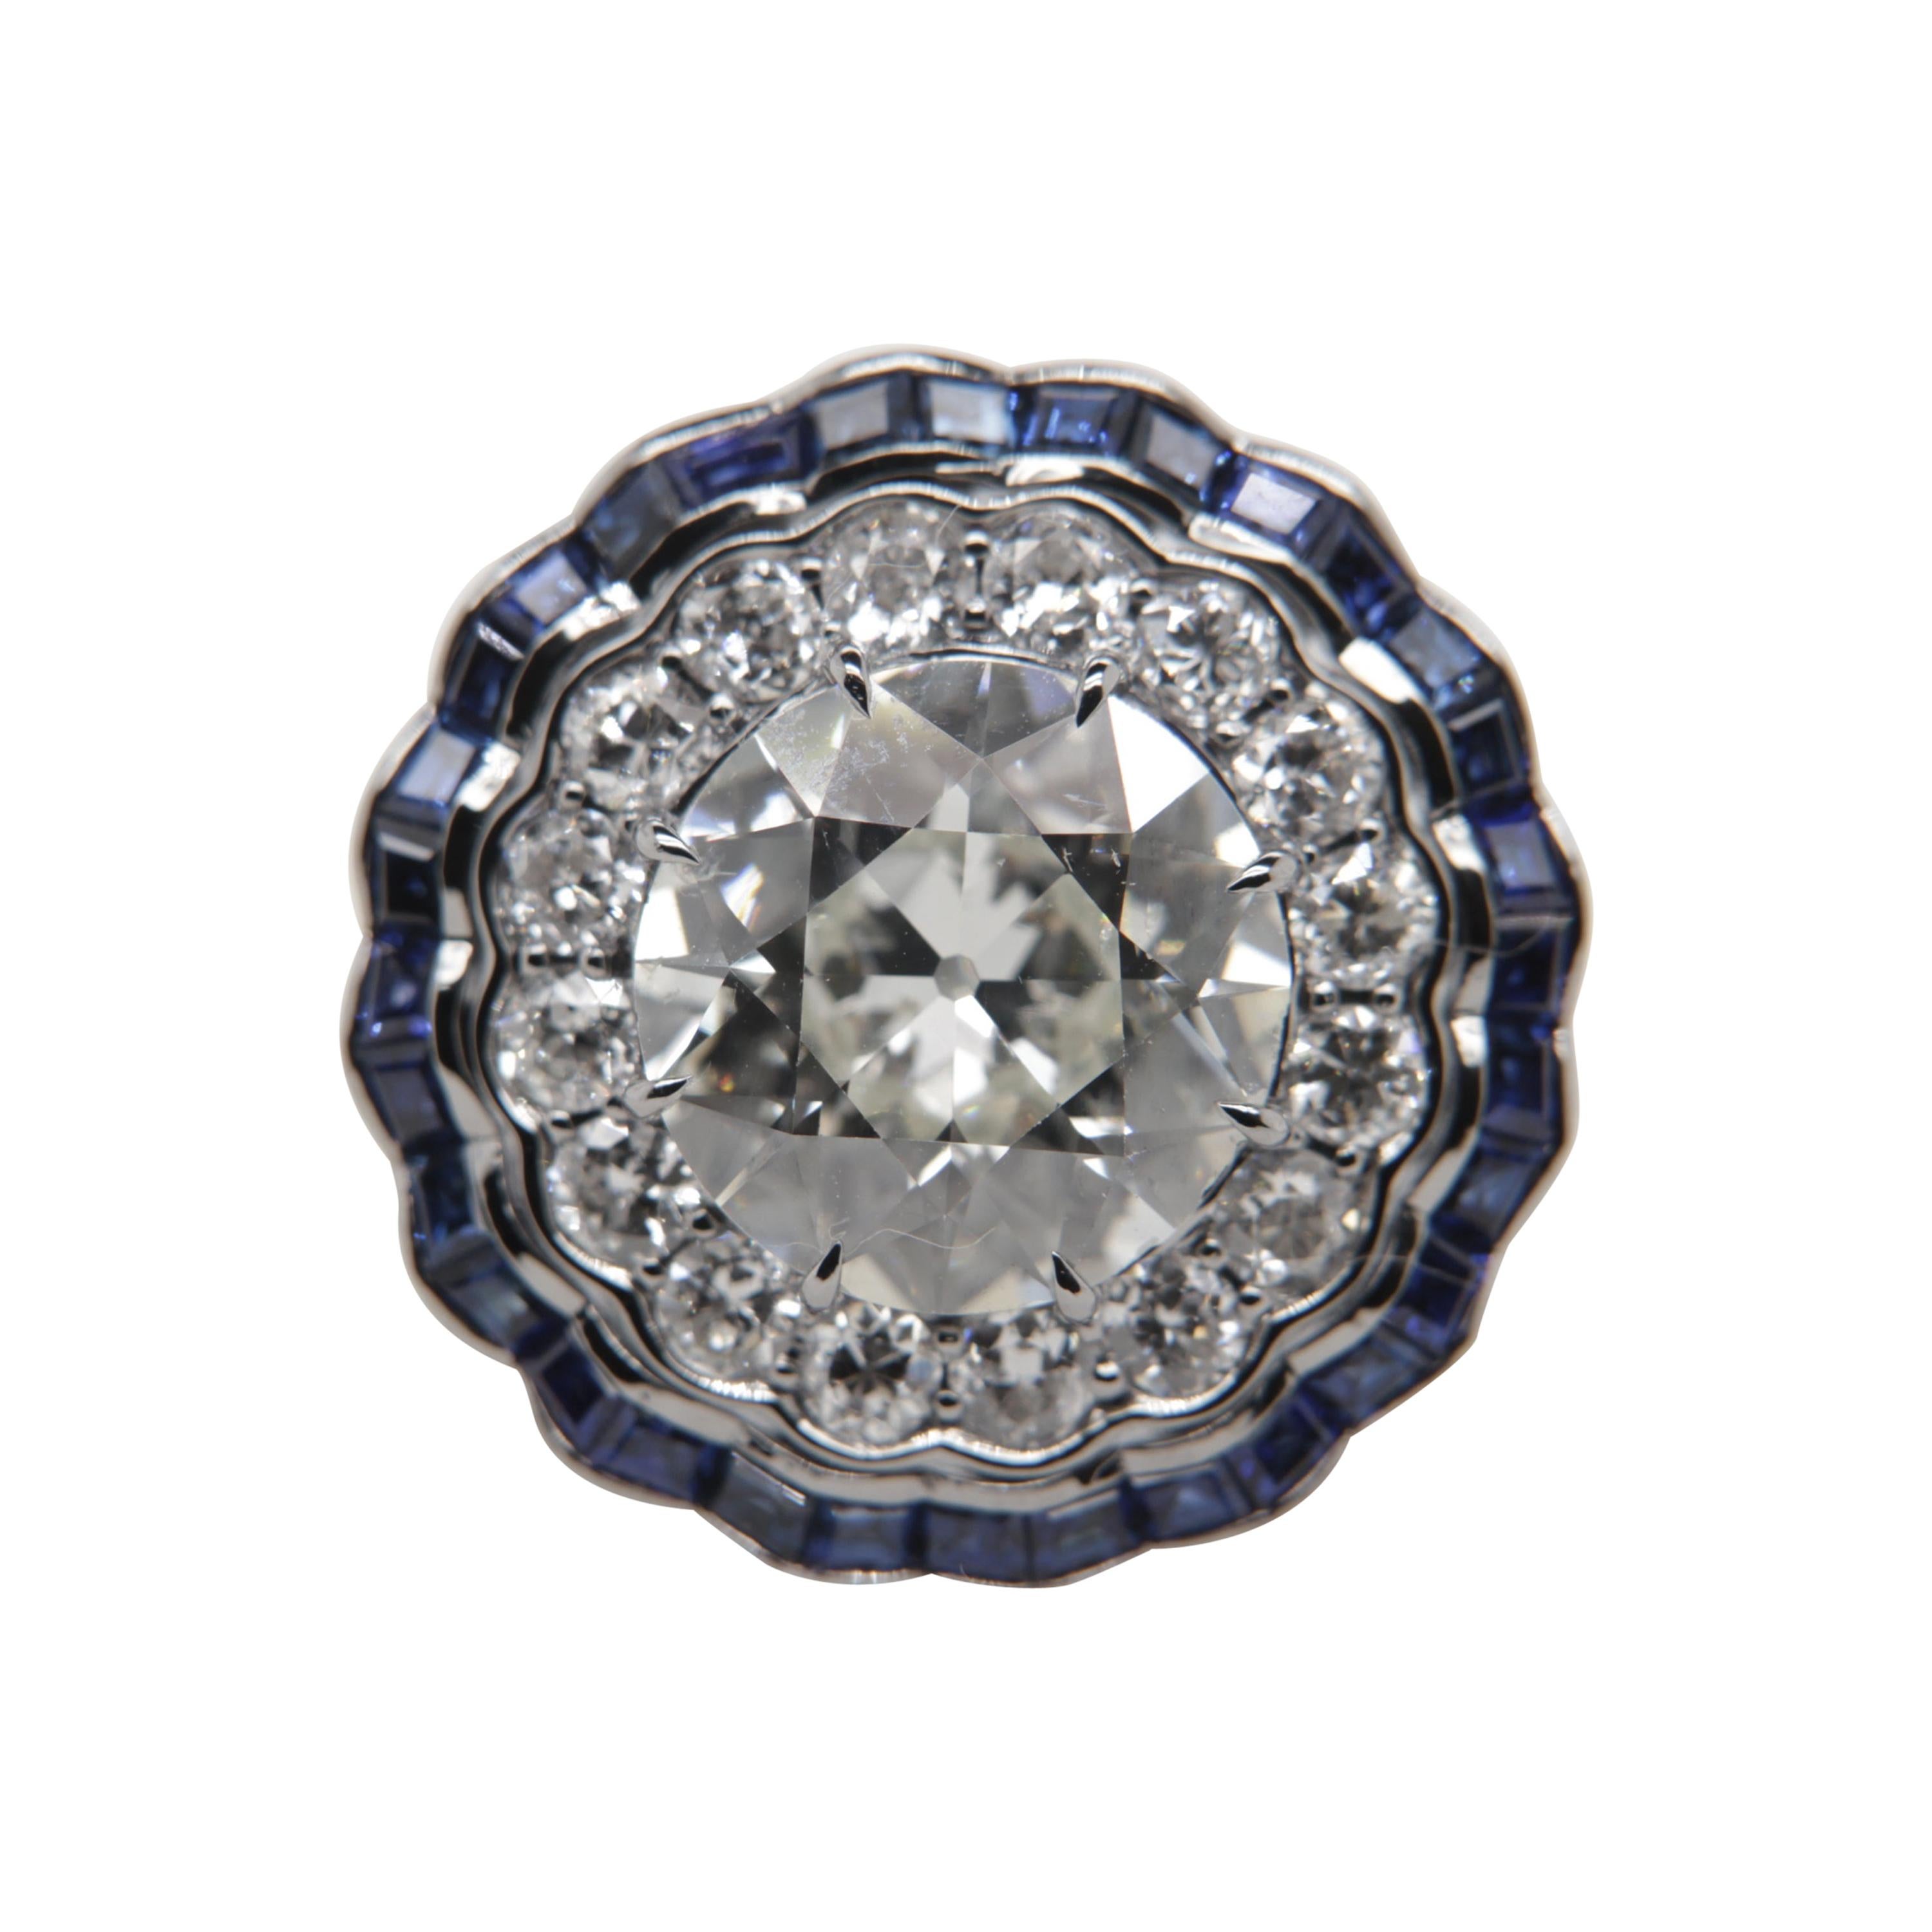 HRD Certified 5.03 Carat Old Cut Diamond and Blue Sapphire Ring in 18 Karat Gold